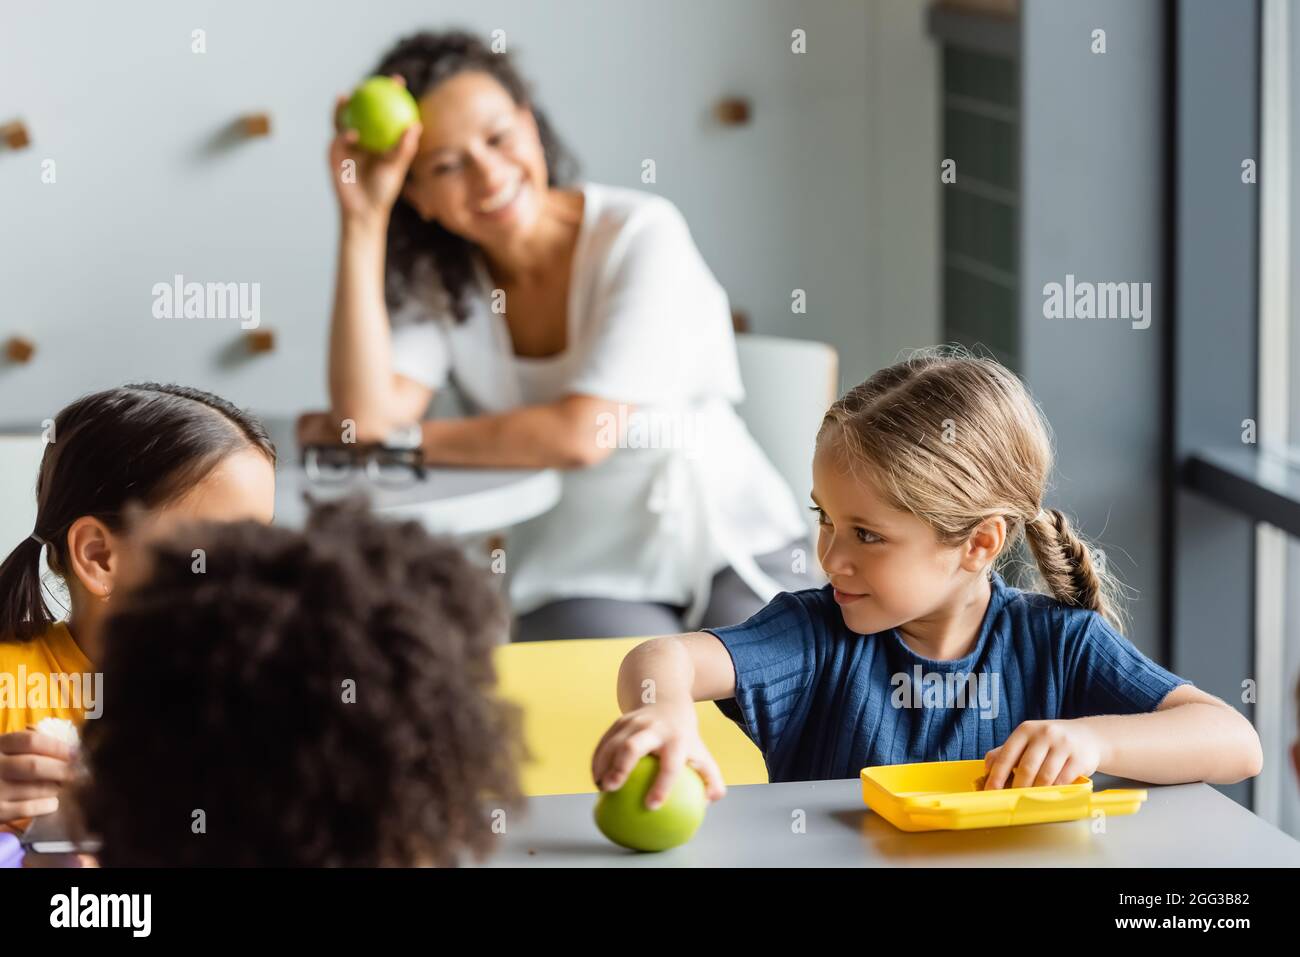 multiethnic kids having lunch in school canteen near teacher smiling on  blurred background Stock Photo - Alamy